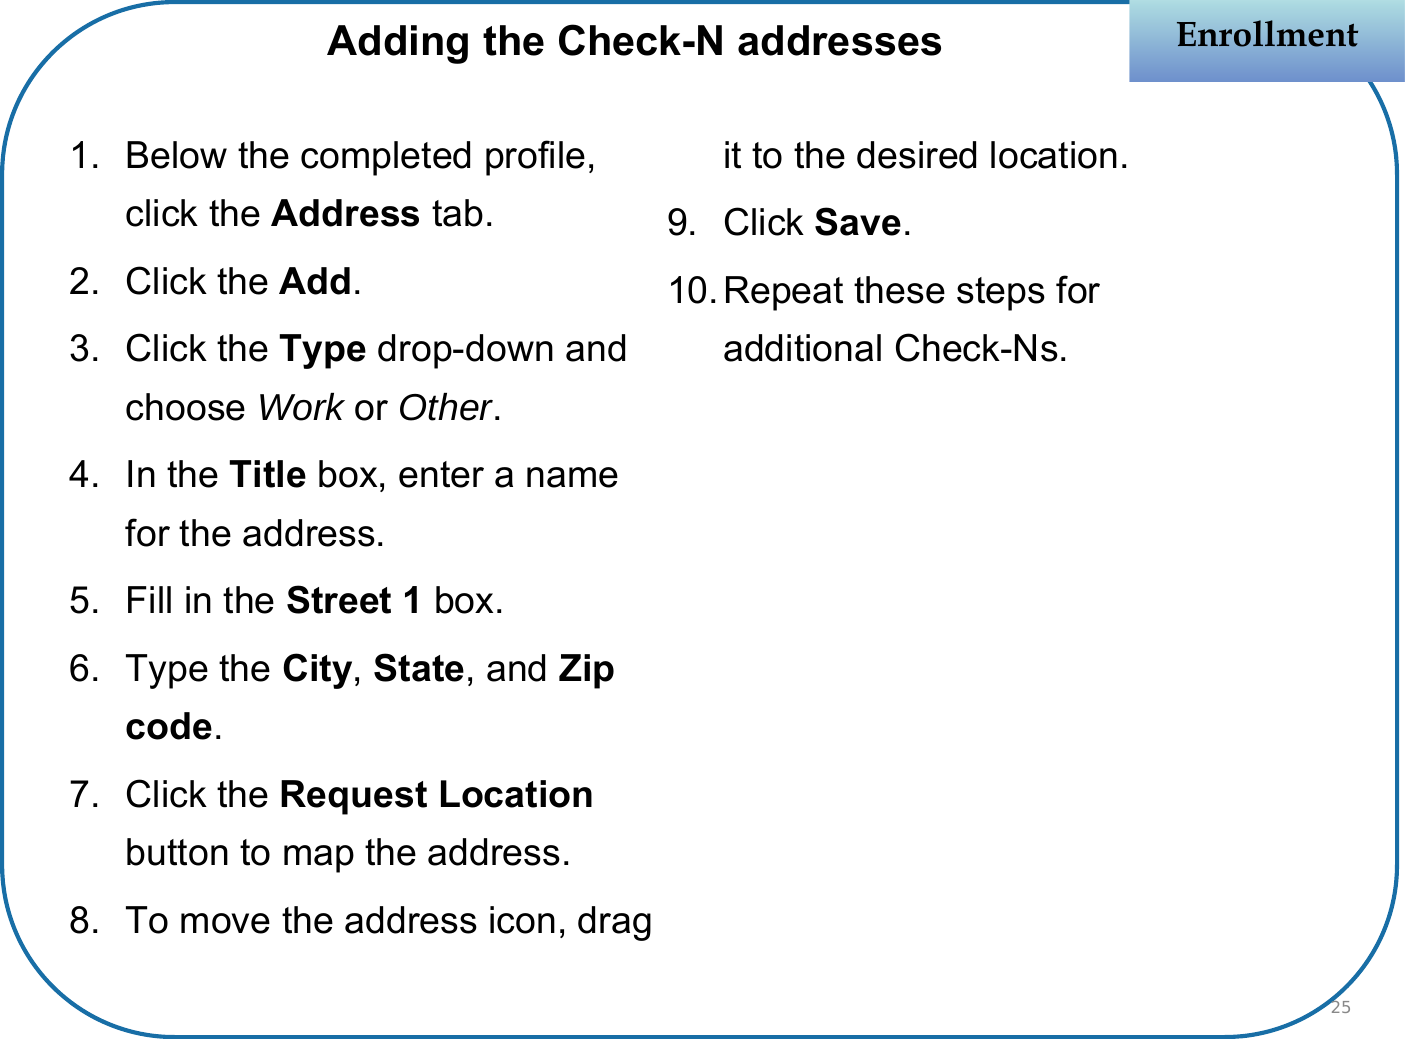 1. Below the completed profile, click the Address tab.2. Click the Add.3. Click the Type drop-down and choose Work or Other.4. In the Title box, enter a name for the address.5. Fill in the Street 1 box.6. Type the City, State, and Zip code.7. Click the Request Location button to map the address.8. To move the address icon, drag it to the desired location.9. Click Save.10.Repeat these steps for additional Check-Ns.EnrollmentEnrollmentAdding the Check-N addresses25